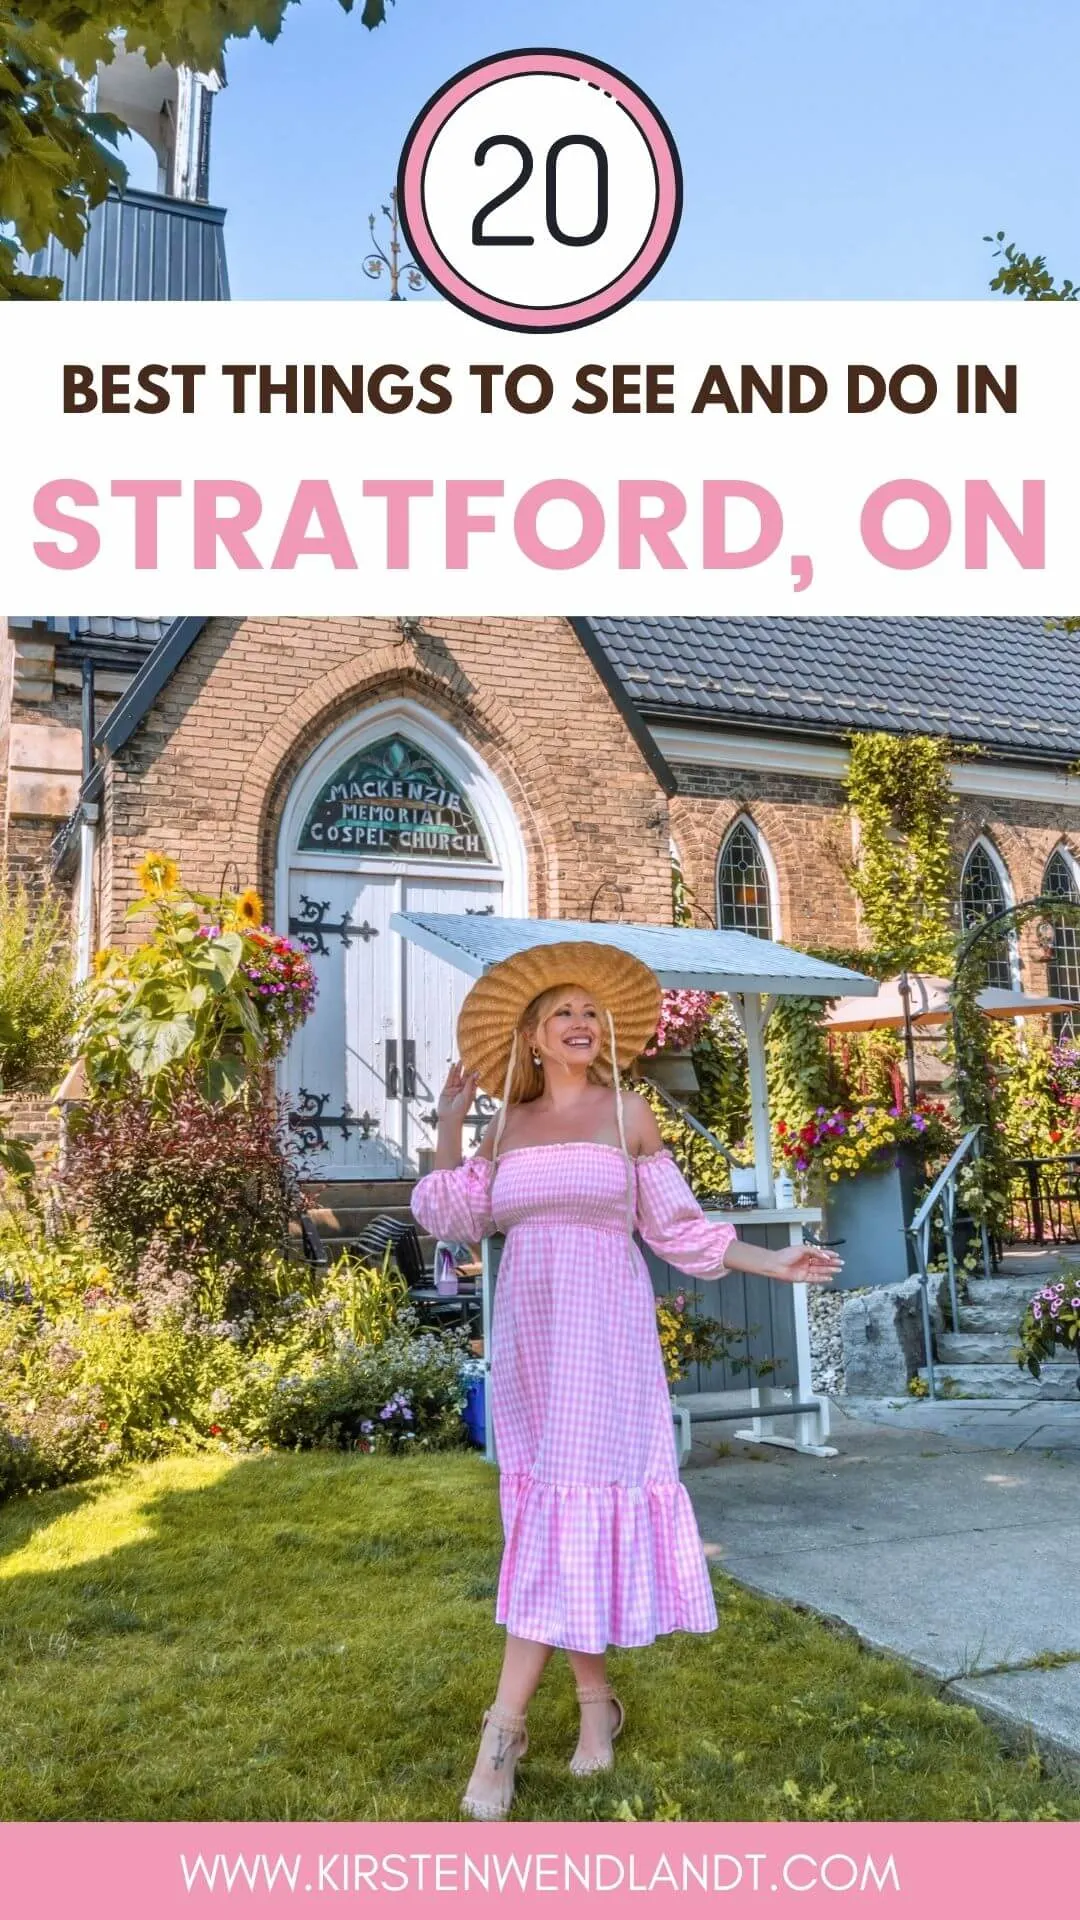 Planning a trip to Stratford, Ontario soon? This guide includes all of the best things to do in Stratford! From activities and attractions, to the top restaurants, bars, and all the things you'll want to see while there. You won't want to miss this guide that will help you plan the perfect weekend getaway to Stratford. Click for the full list.